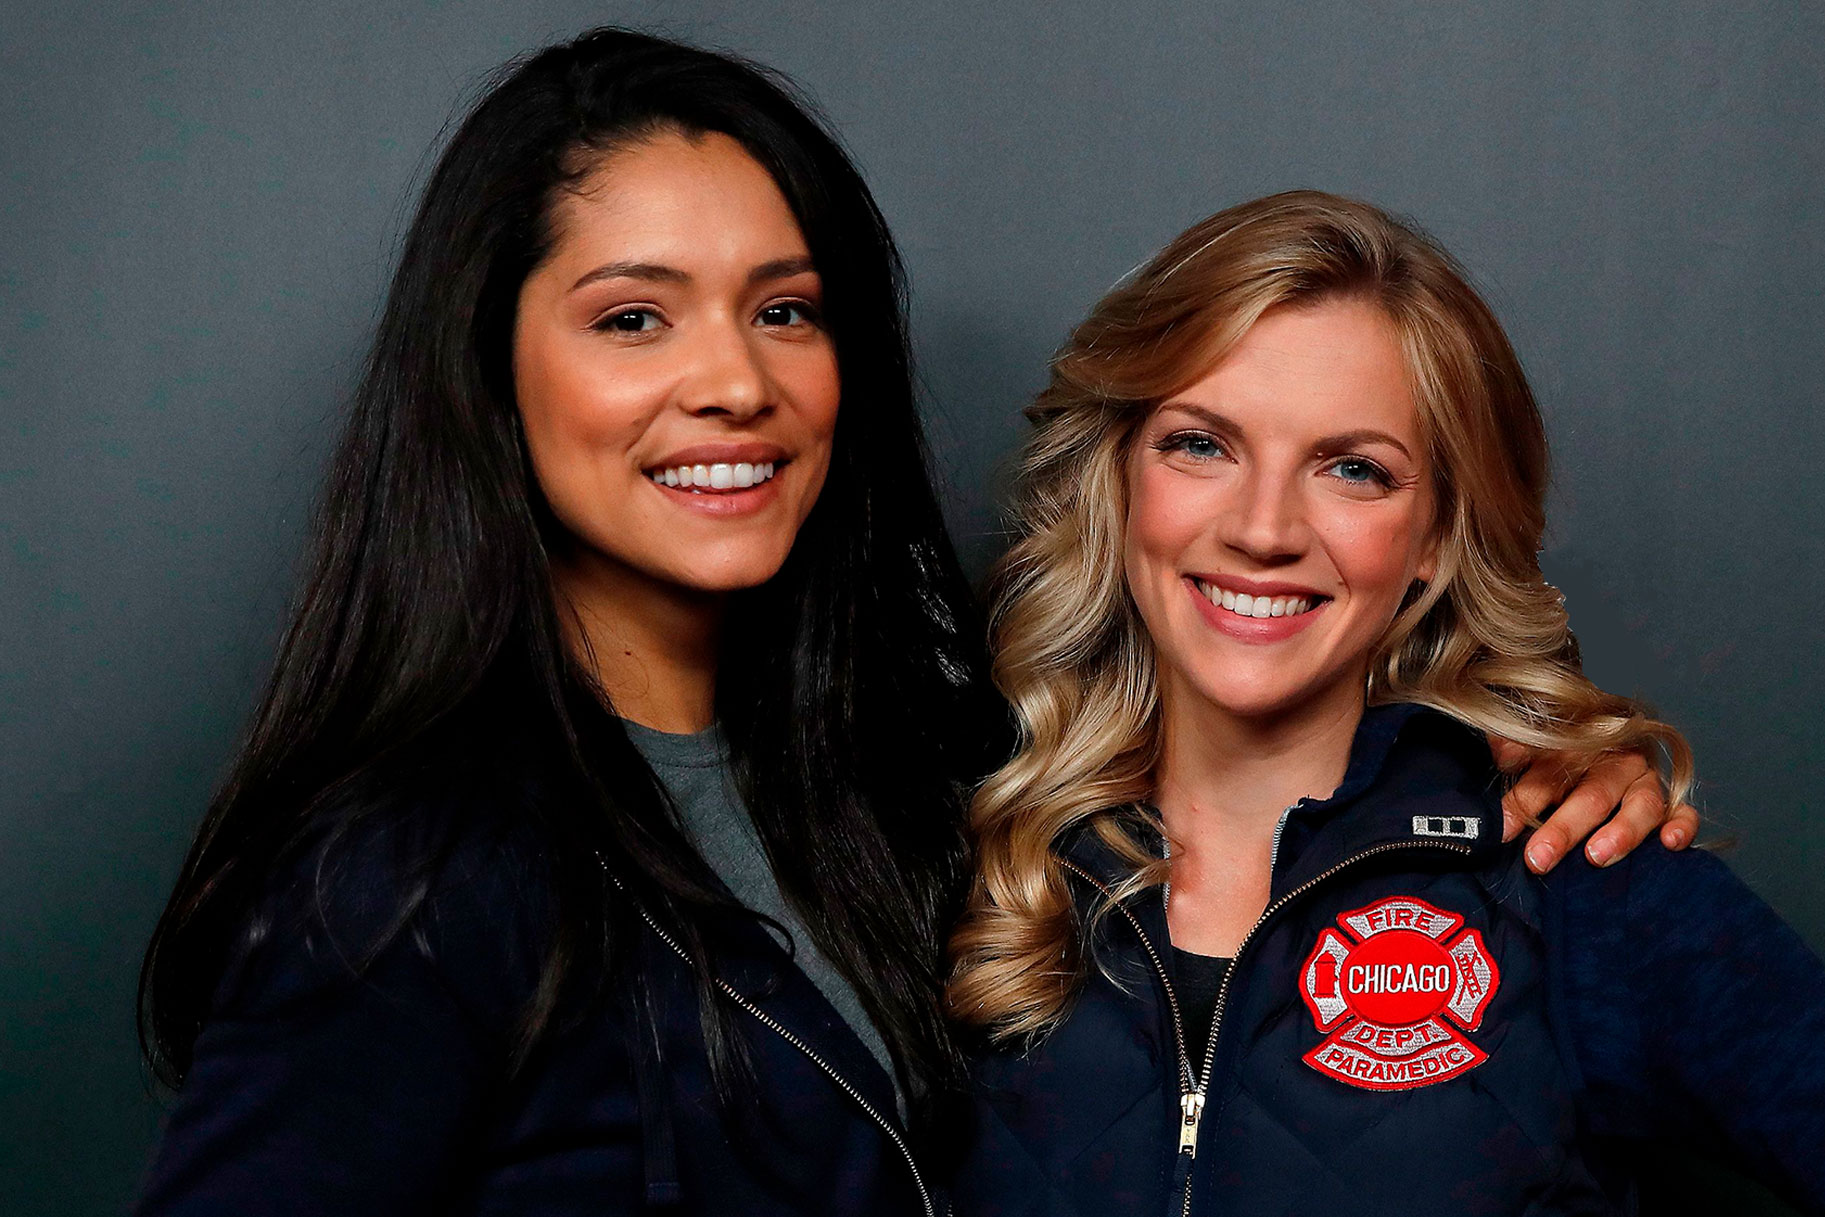 Miranda Rae Mayo (L) and Kara Kilmer arrive on the red carpet at the 3rd Annual Chicago Press Day in Chicago.